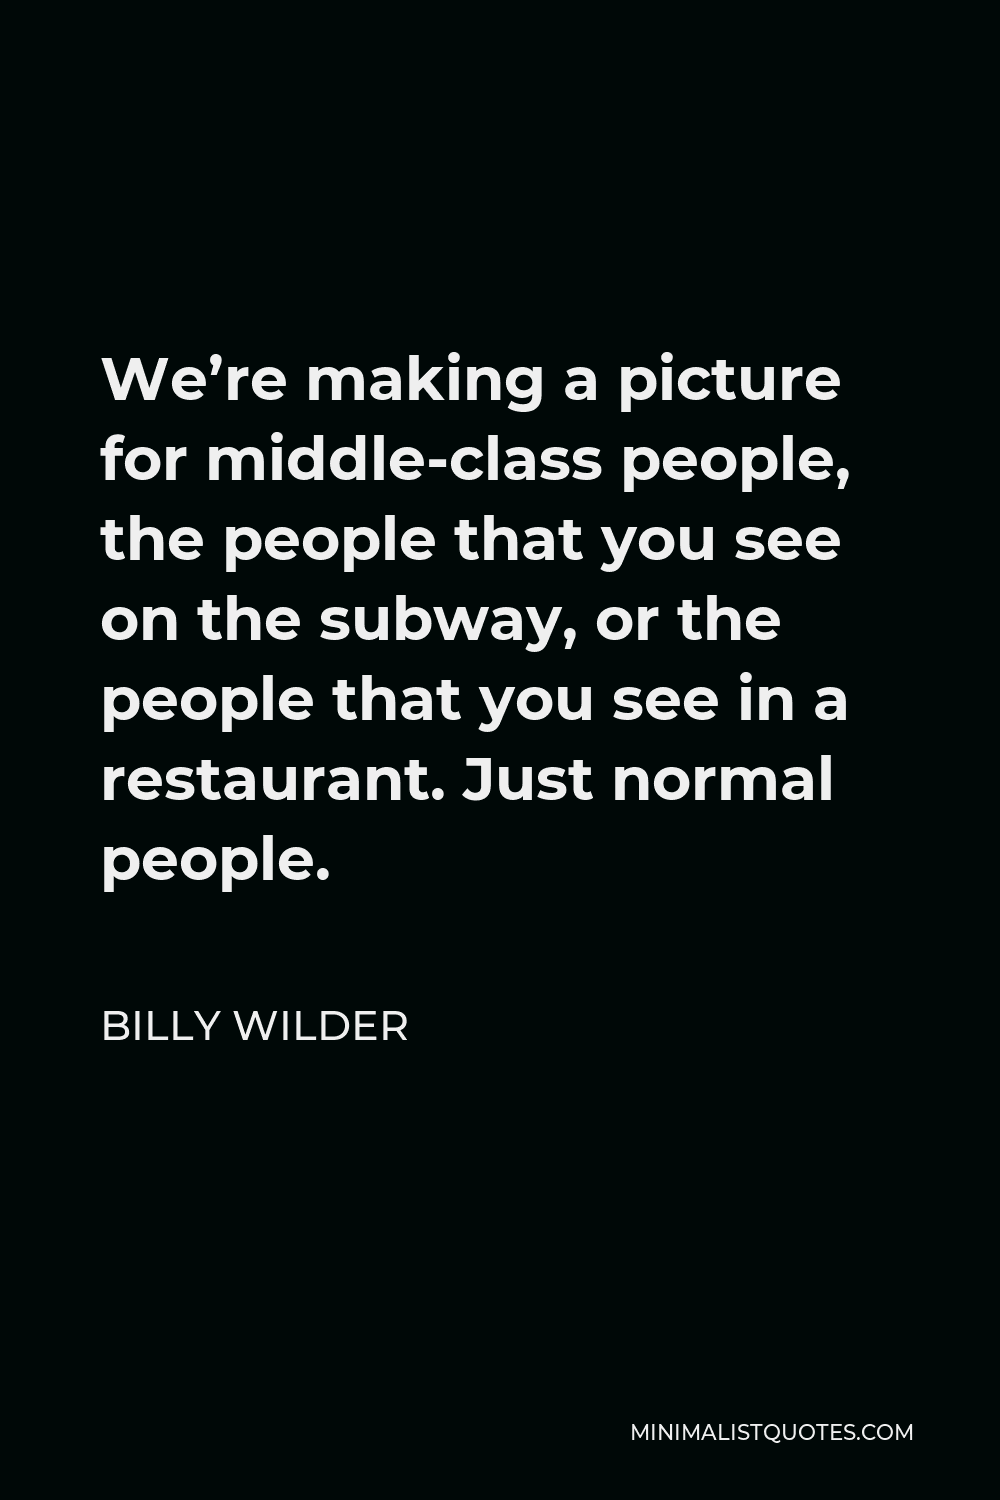 Billy Wilder Quote - We’re making a picture for middle-class people, the people that you see on the subway, or the people that you see in a restaurant. Just normal people.